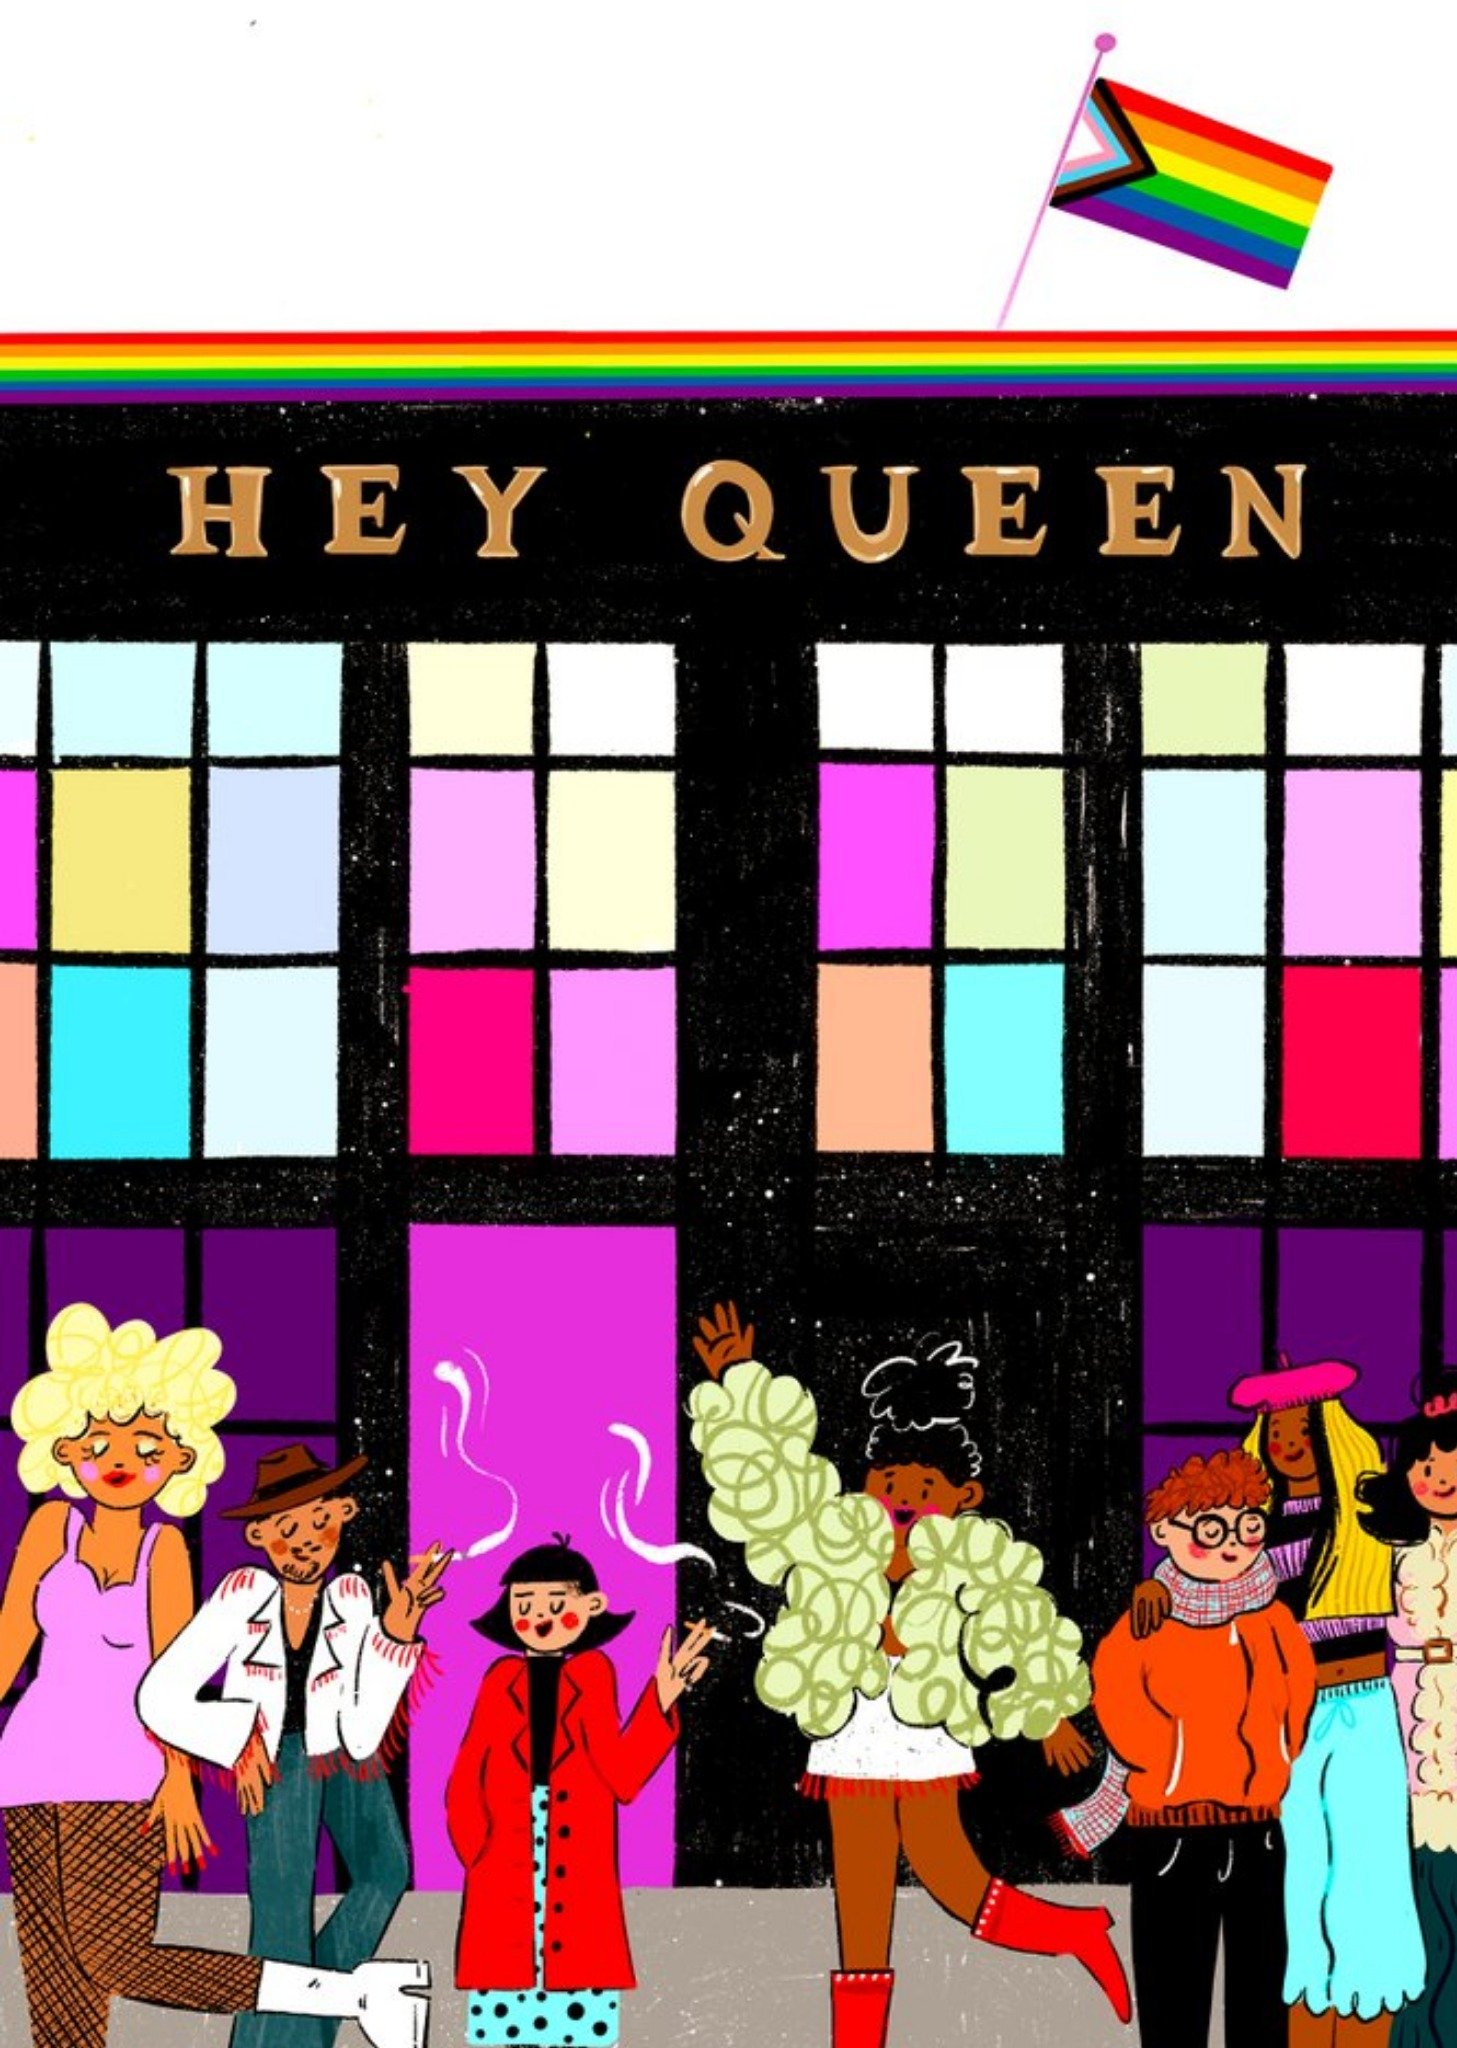 Moonpig Illustrated Hey Queen LGBTQ+ Pride Just To Say Card Ecard